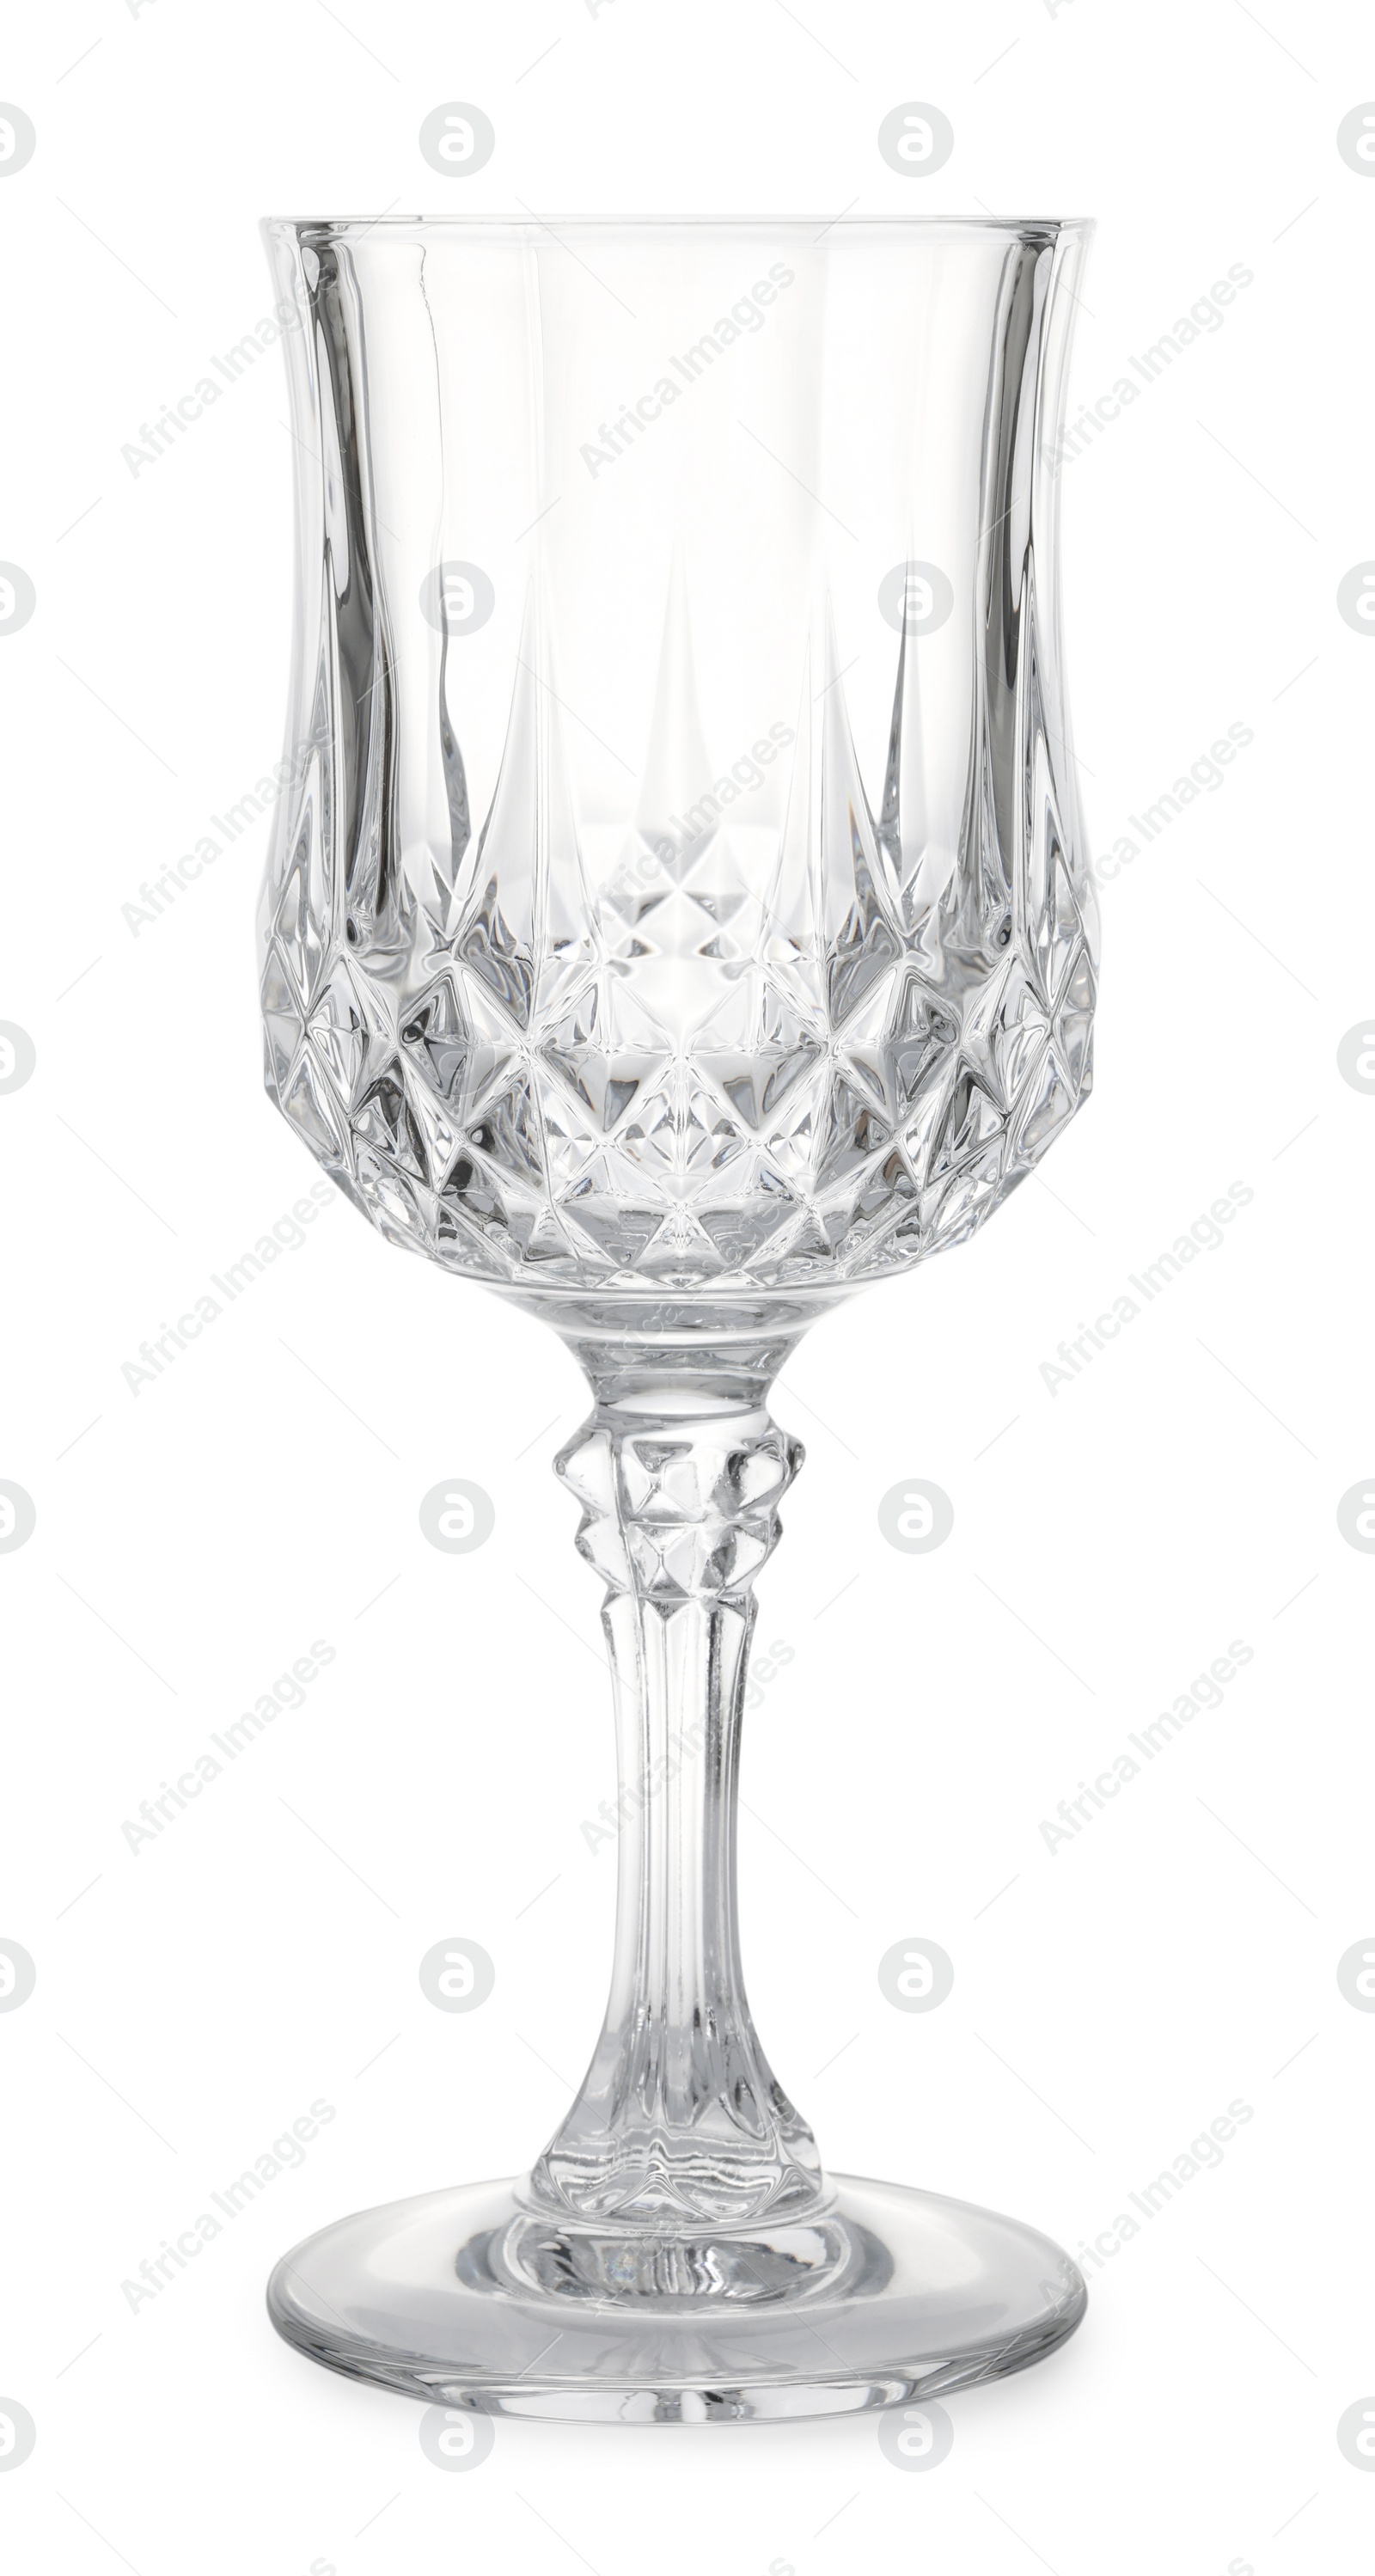 Photo of One stylish clean wine glass isolated on white